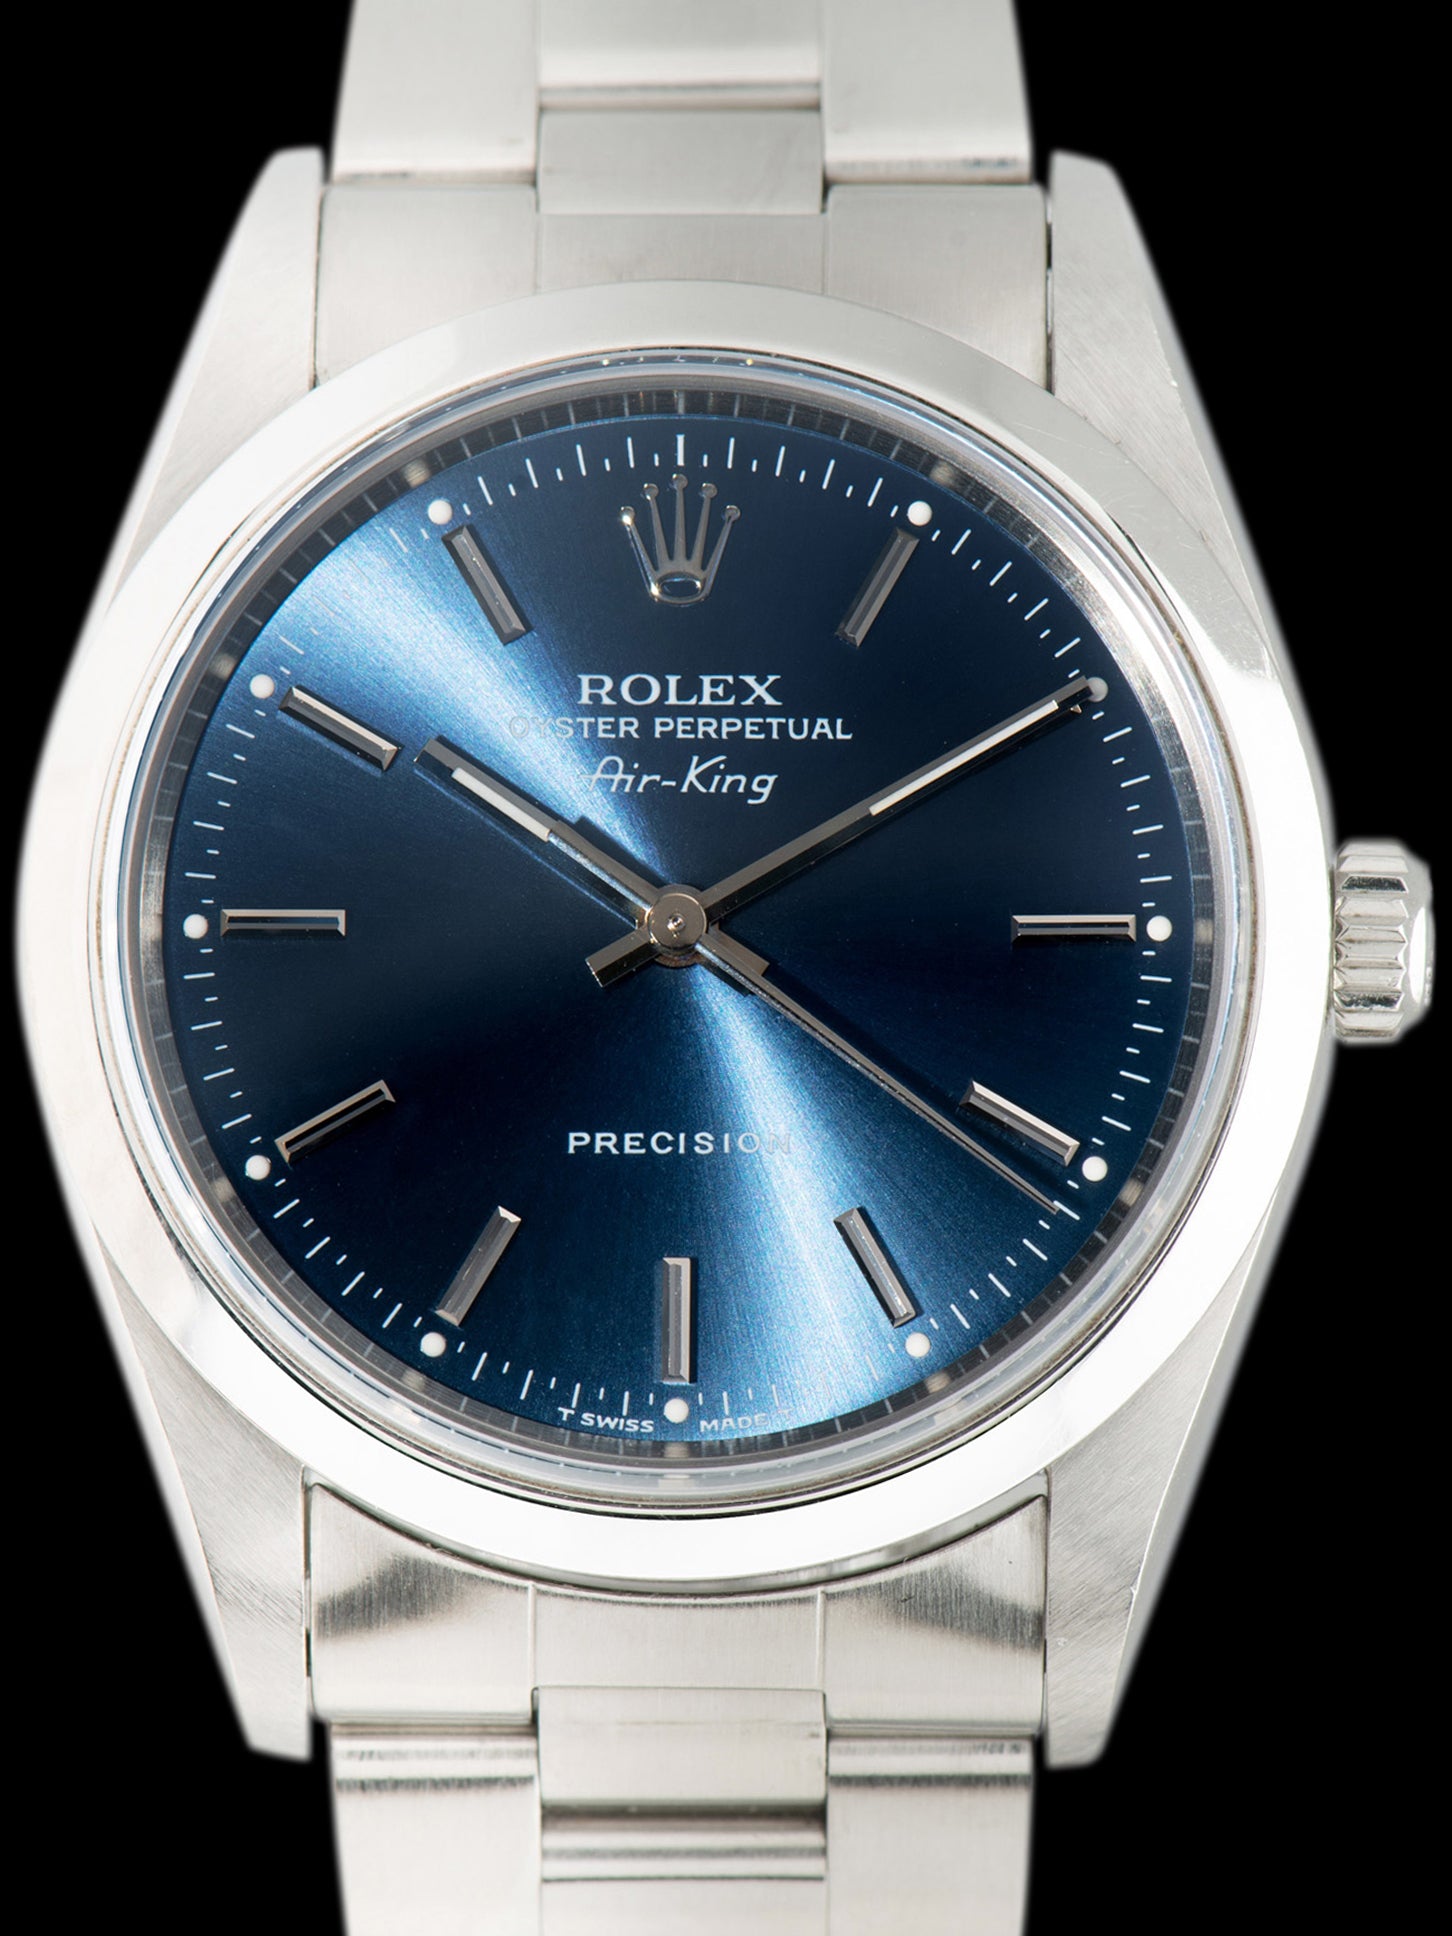 1995 Rolex Air-King (Ref. 14000) Blue Dial W/ Box, Papers & RSC Card